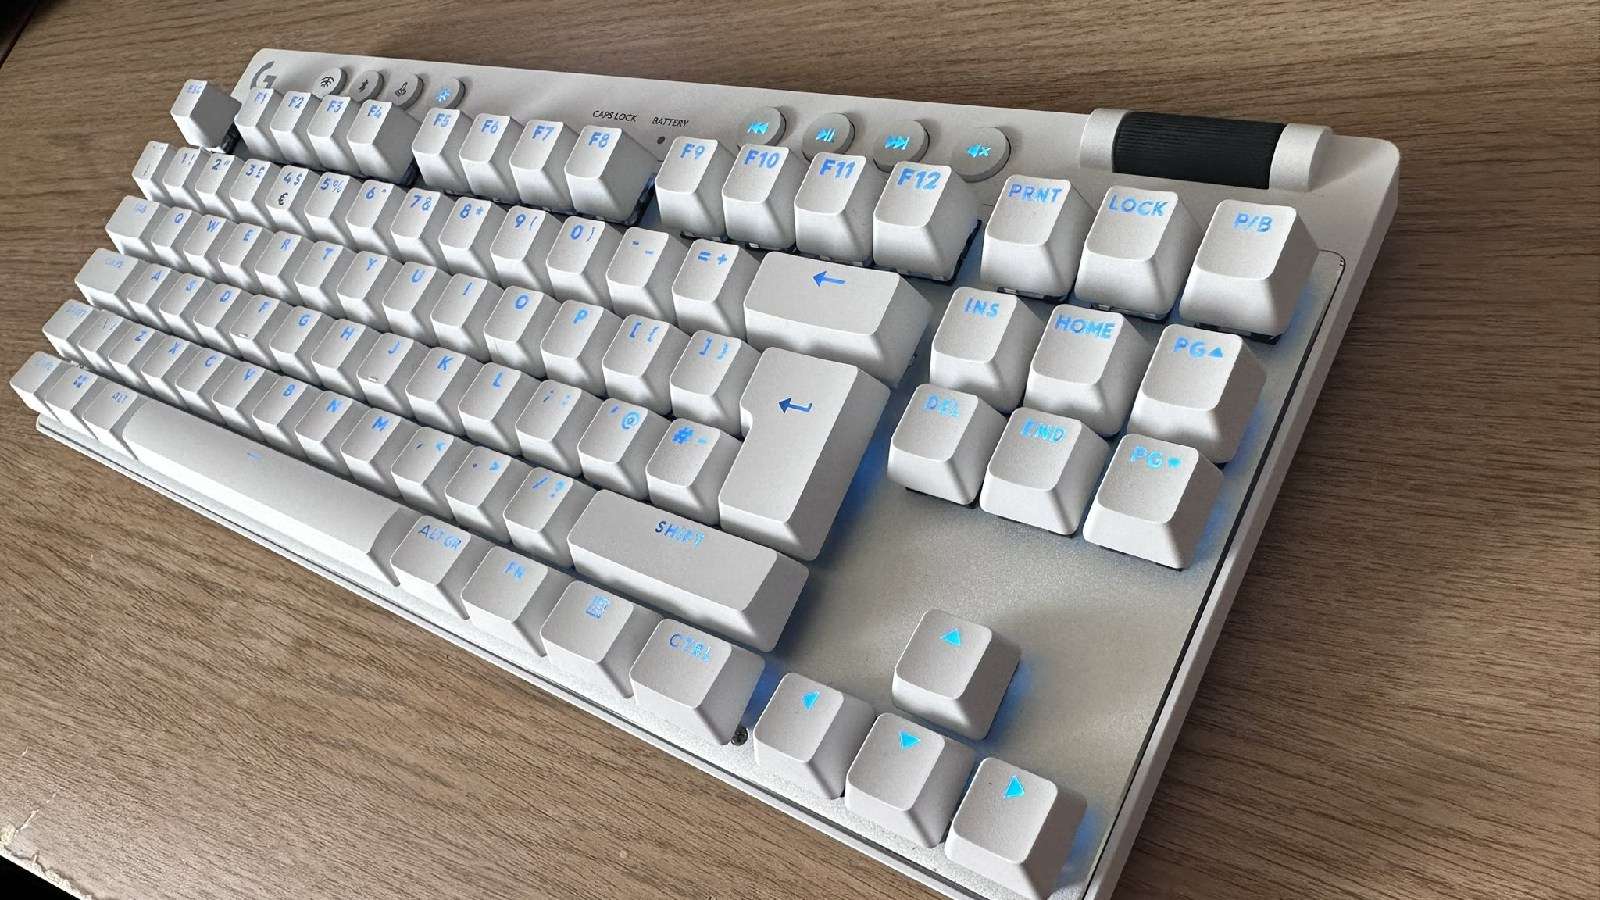 G Pro X TKL at cantered angle